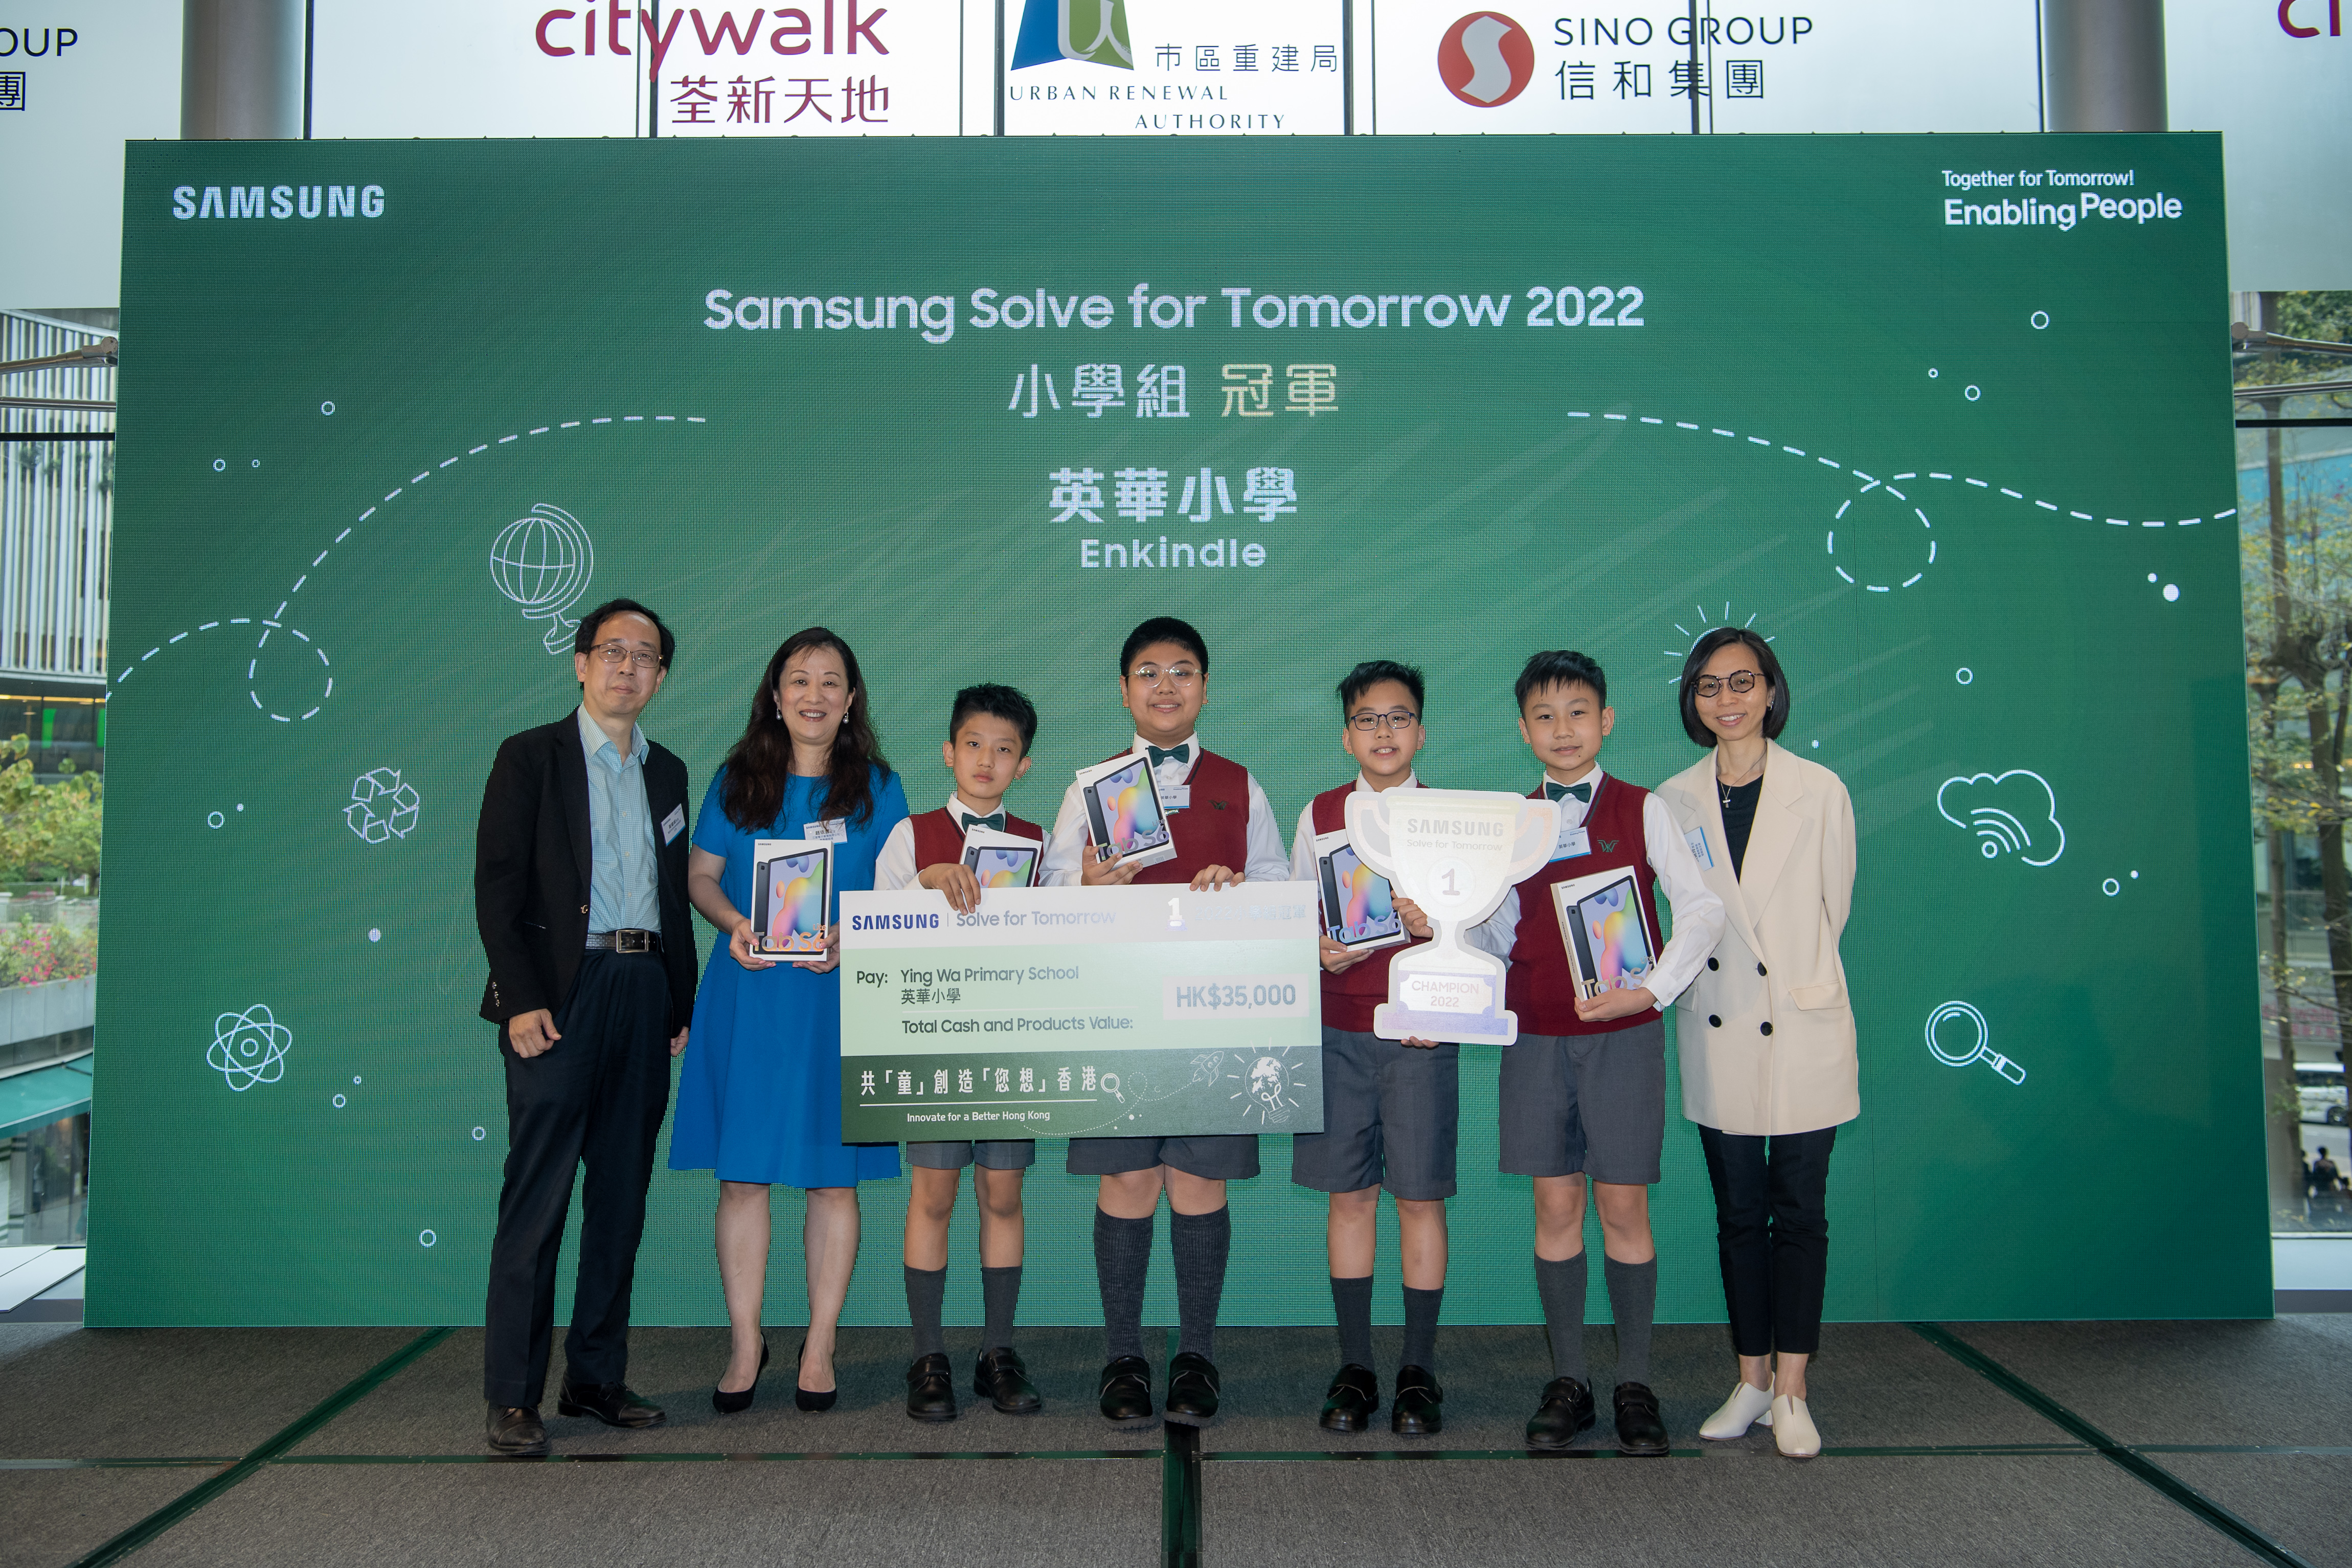 Ying Wa Primary School won the Champion of the primary school category with 